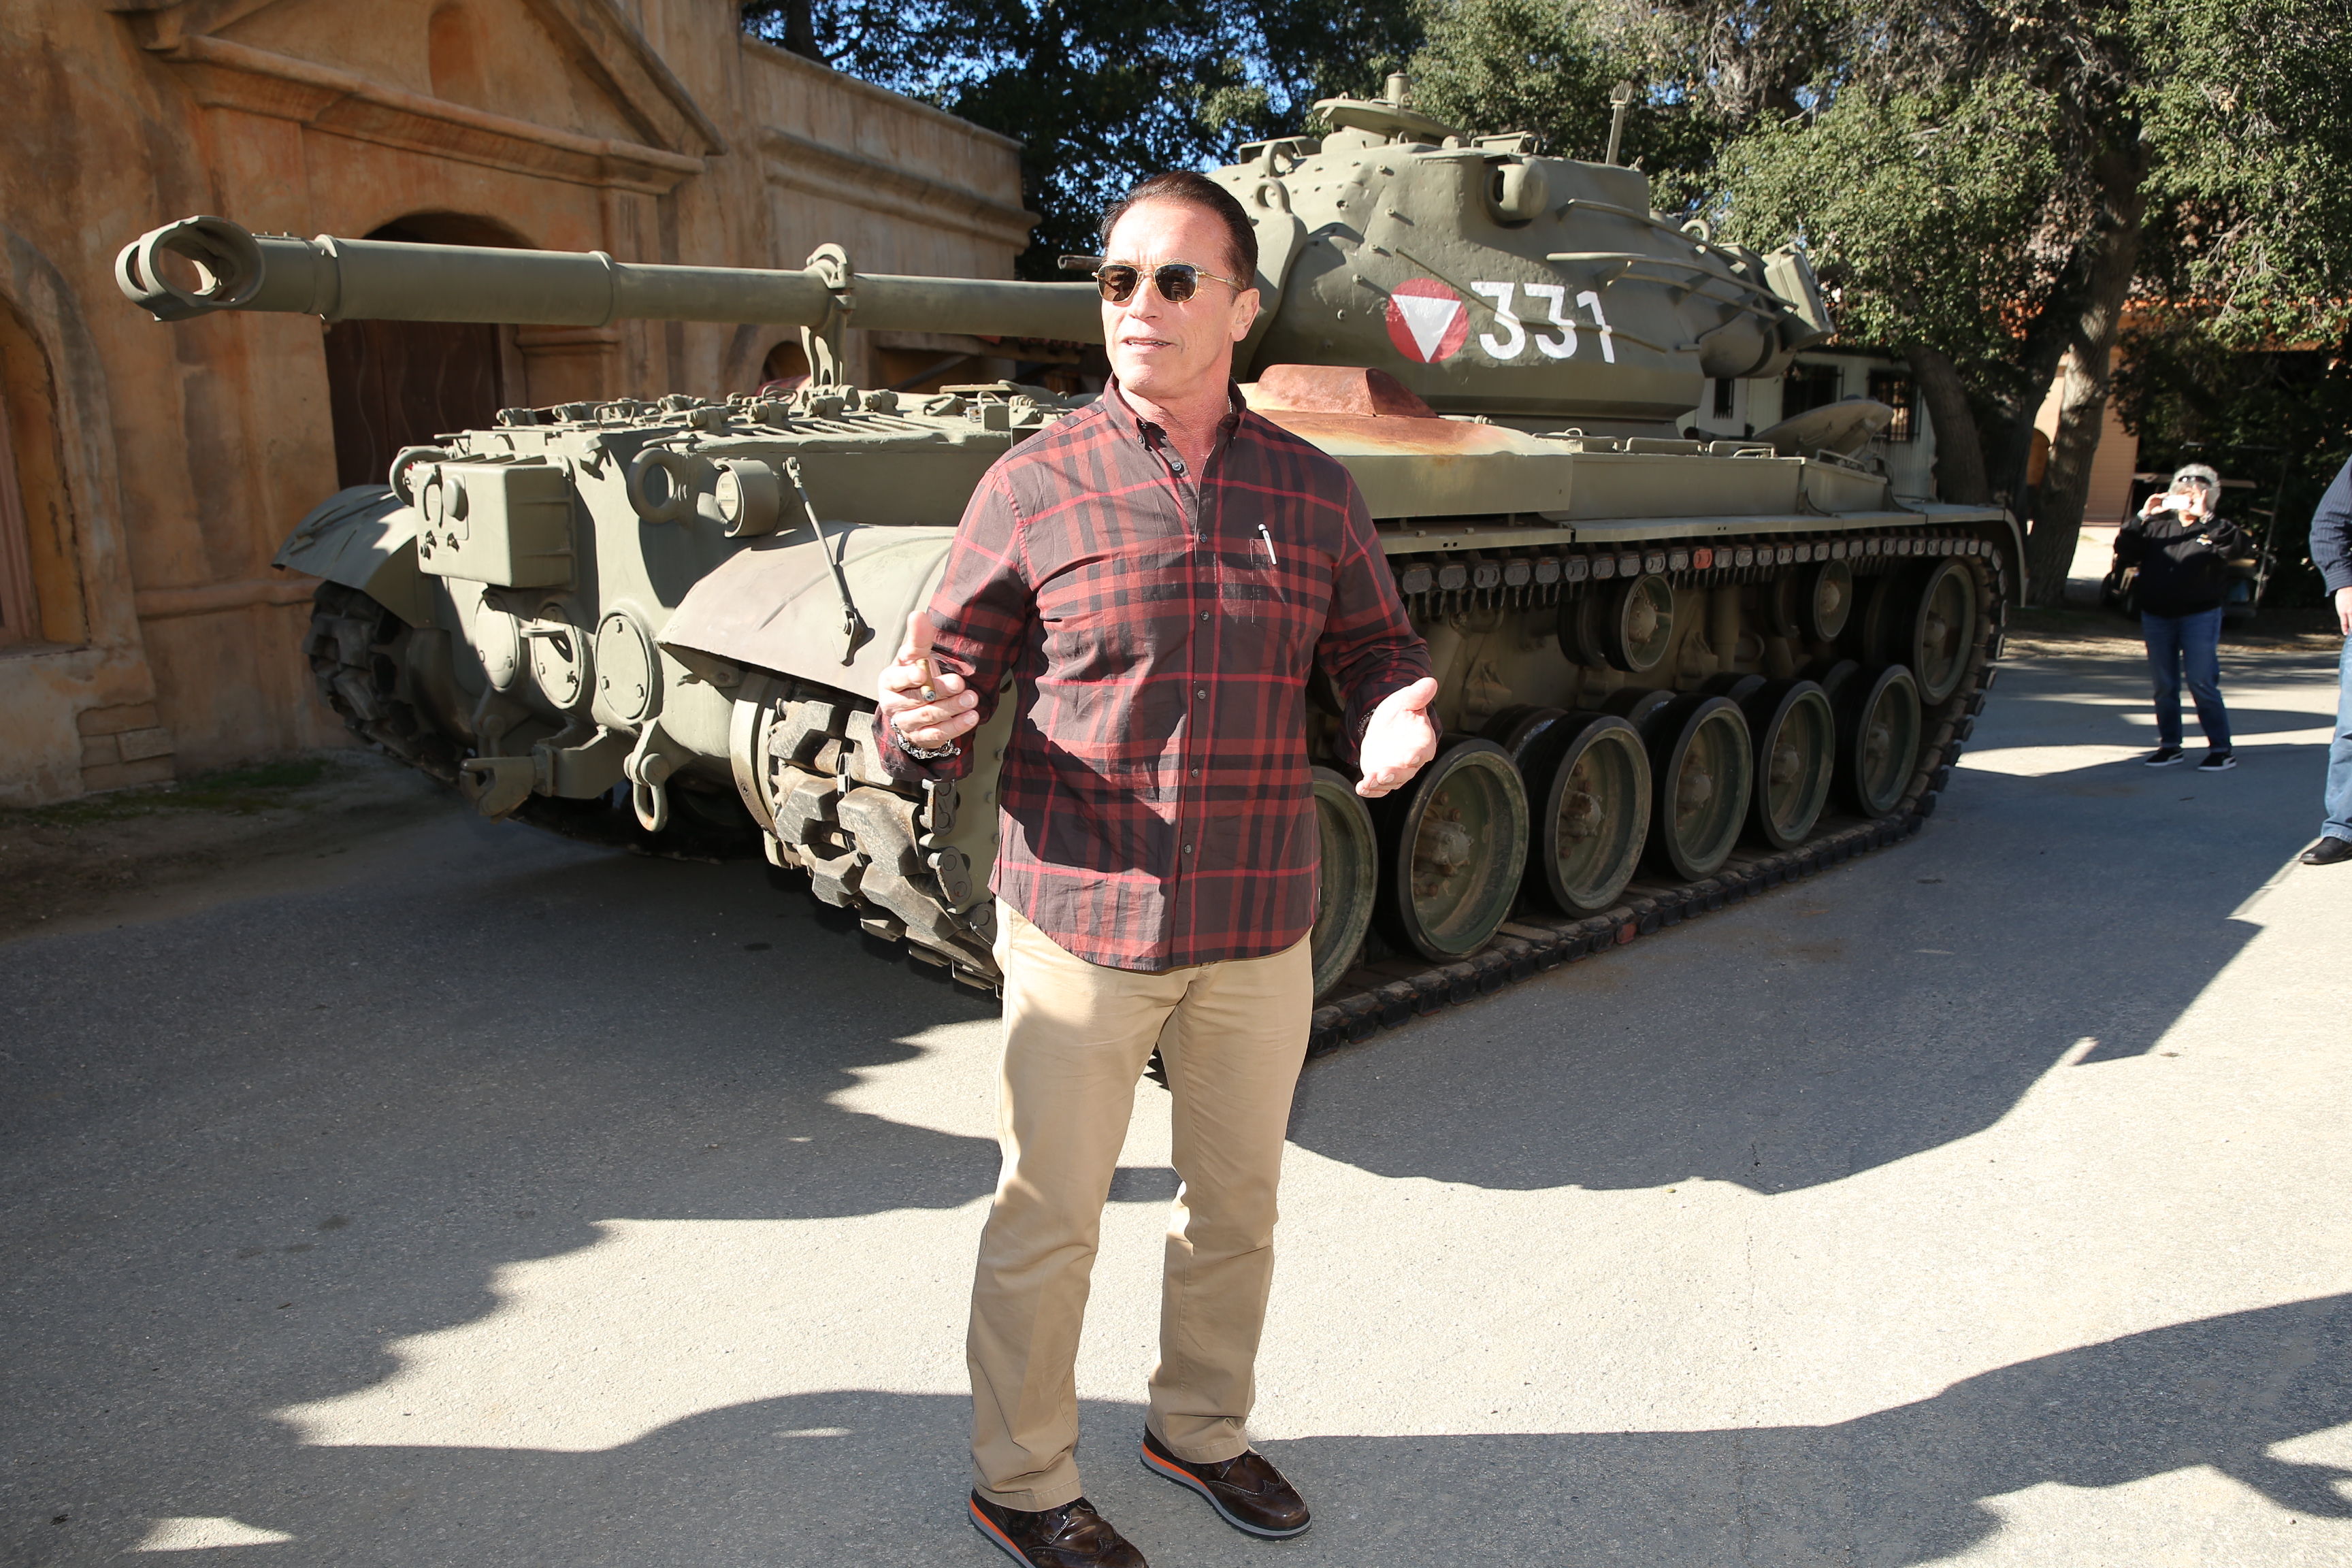 Arnold Schwarzenegger bought the tank he drove during military 

service.